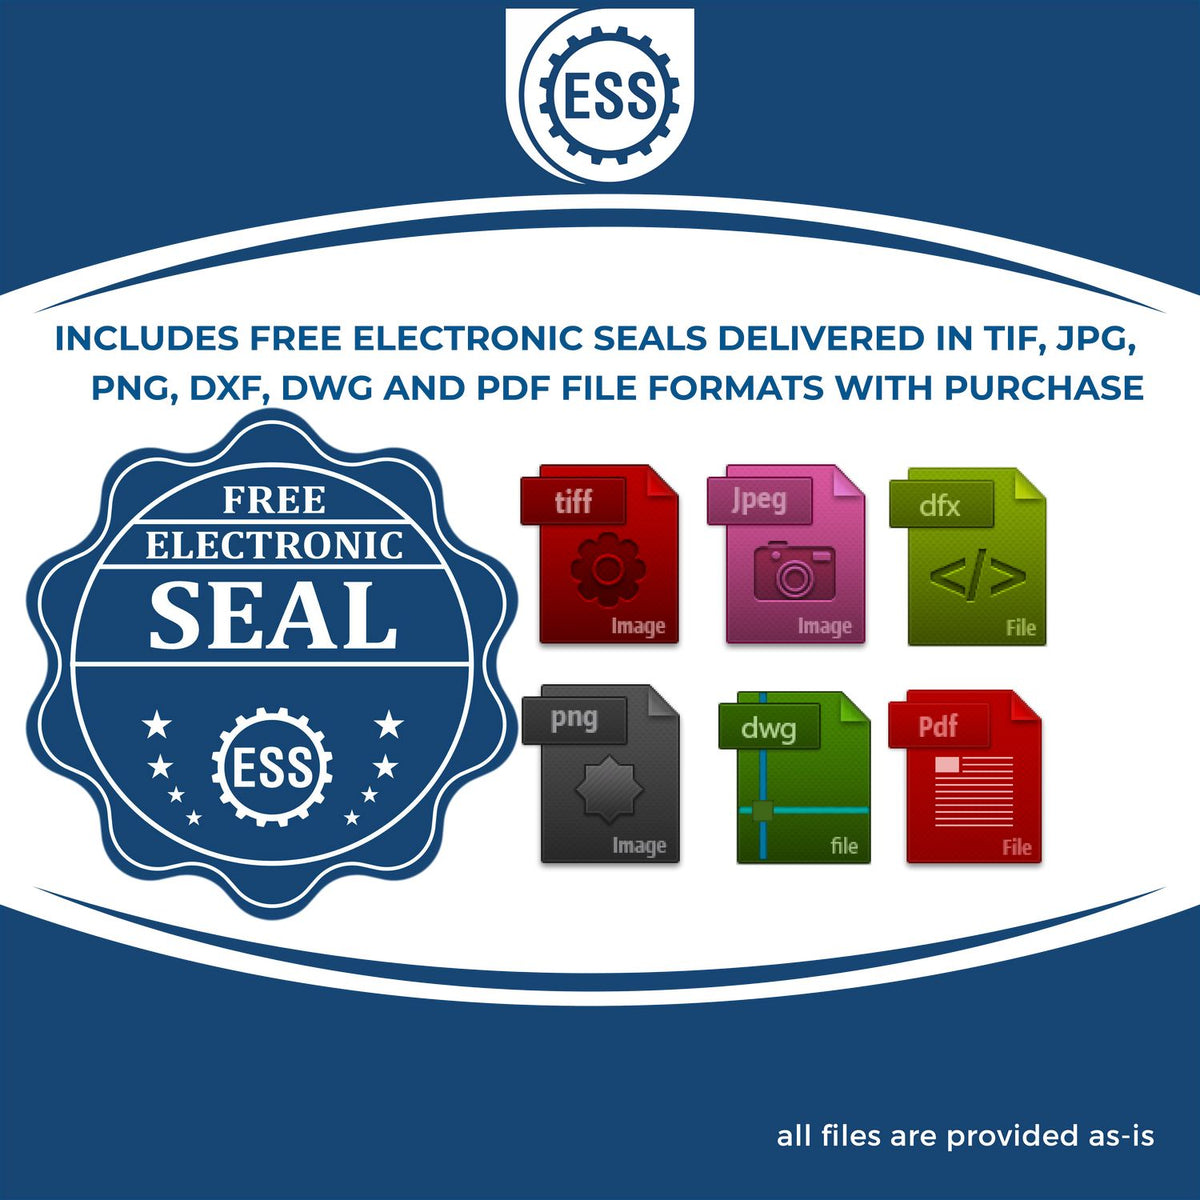 An infographic for the free electronic seal for the State of Georgia Extended Long Reach Geologist Seal illustrating the different file type icons such as DXF, DWG, TIF, JPG and PNG.